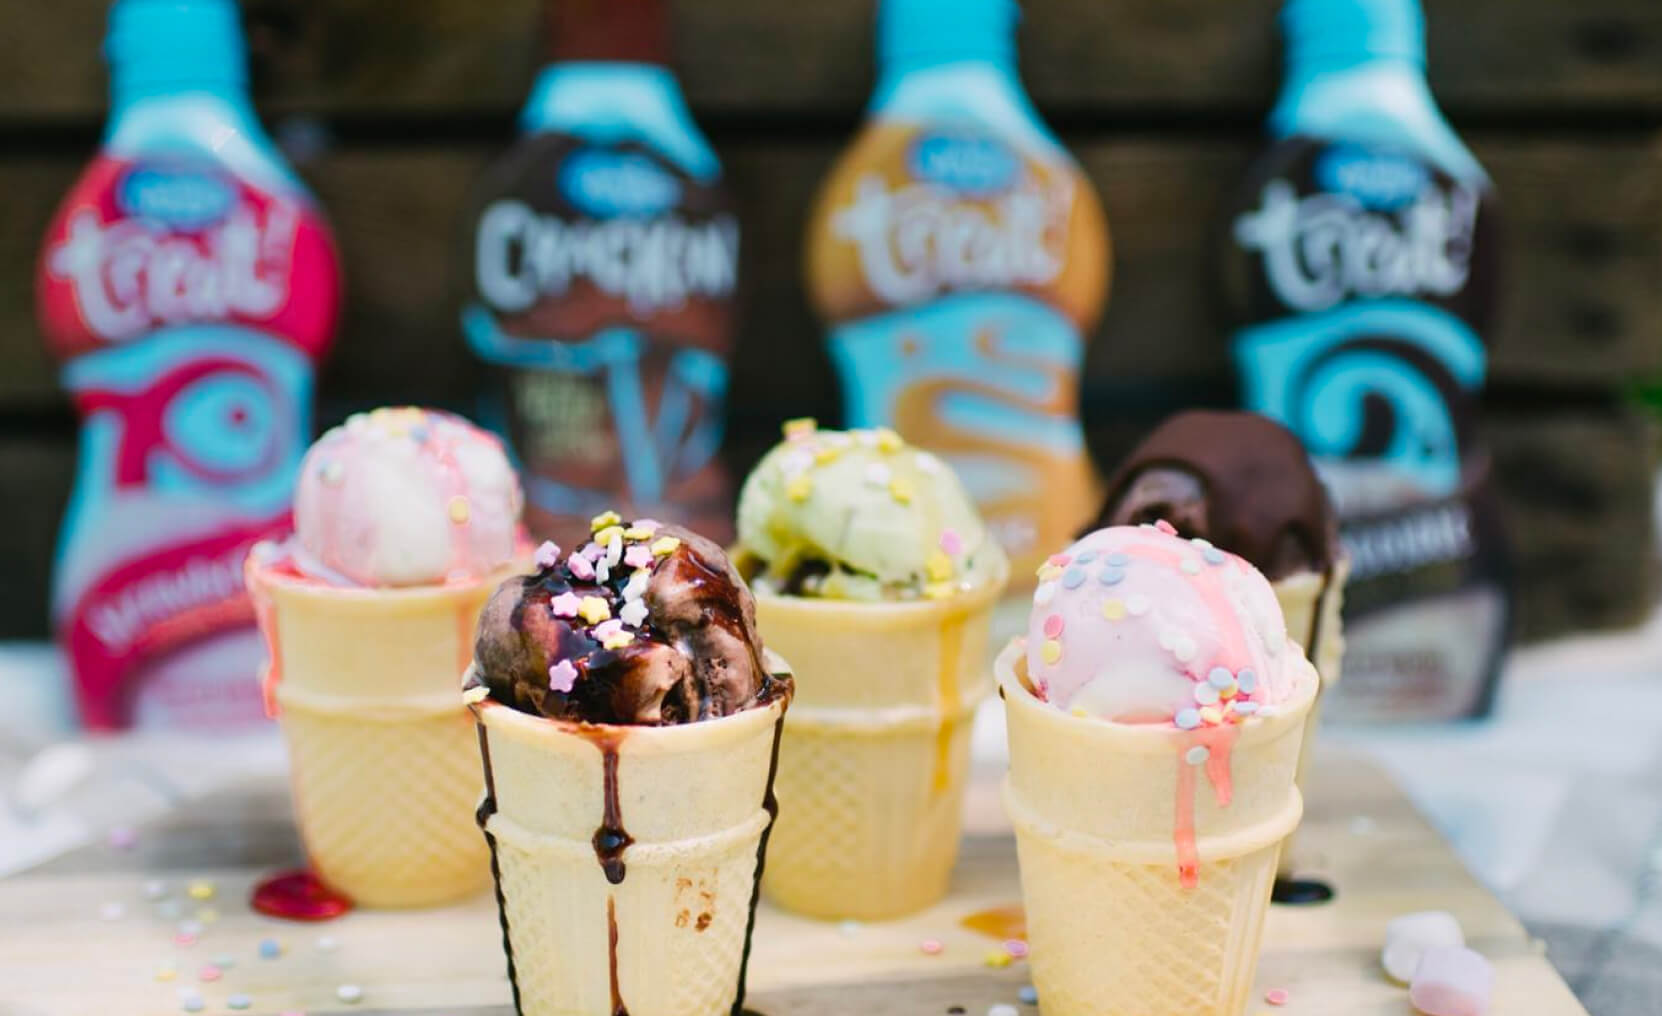 Wafer cones filled with different ice cream flavours and topped with Askeys sauce and sprinkles on a wooden serving board. Behind them, Askeys sauces for ice cream in all their different flavours.